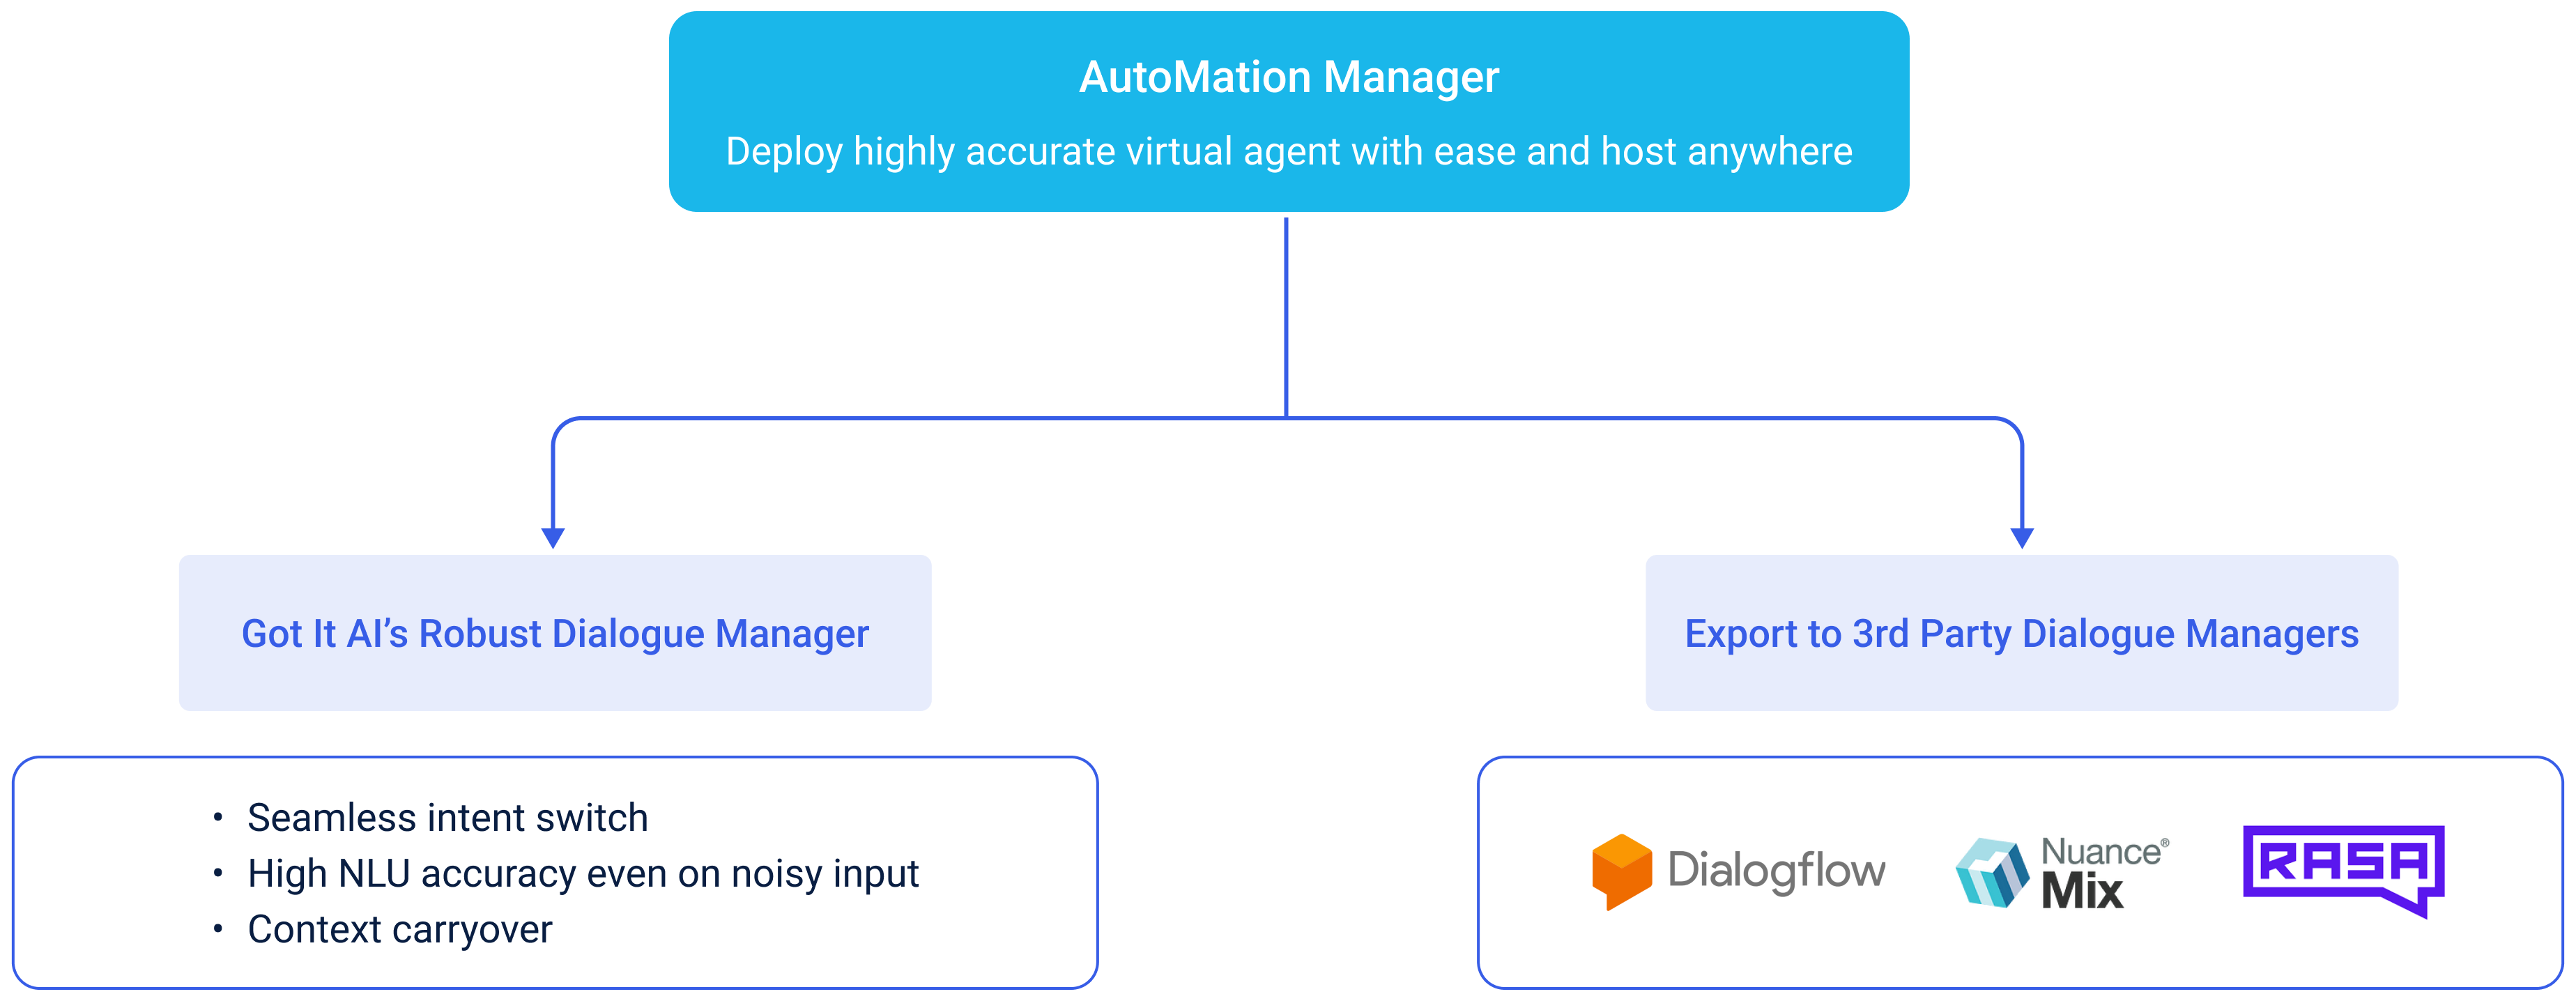 AutoMation Manager